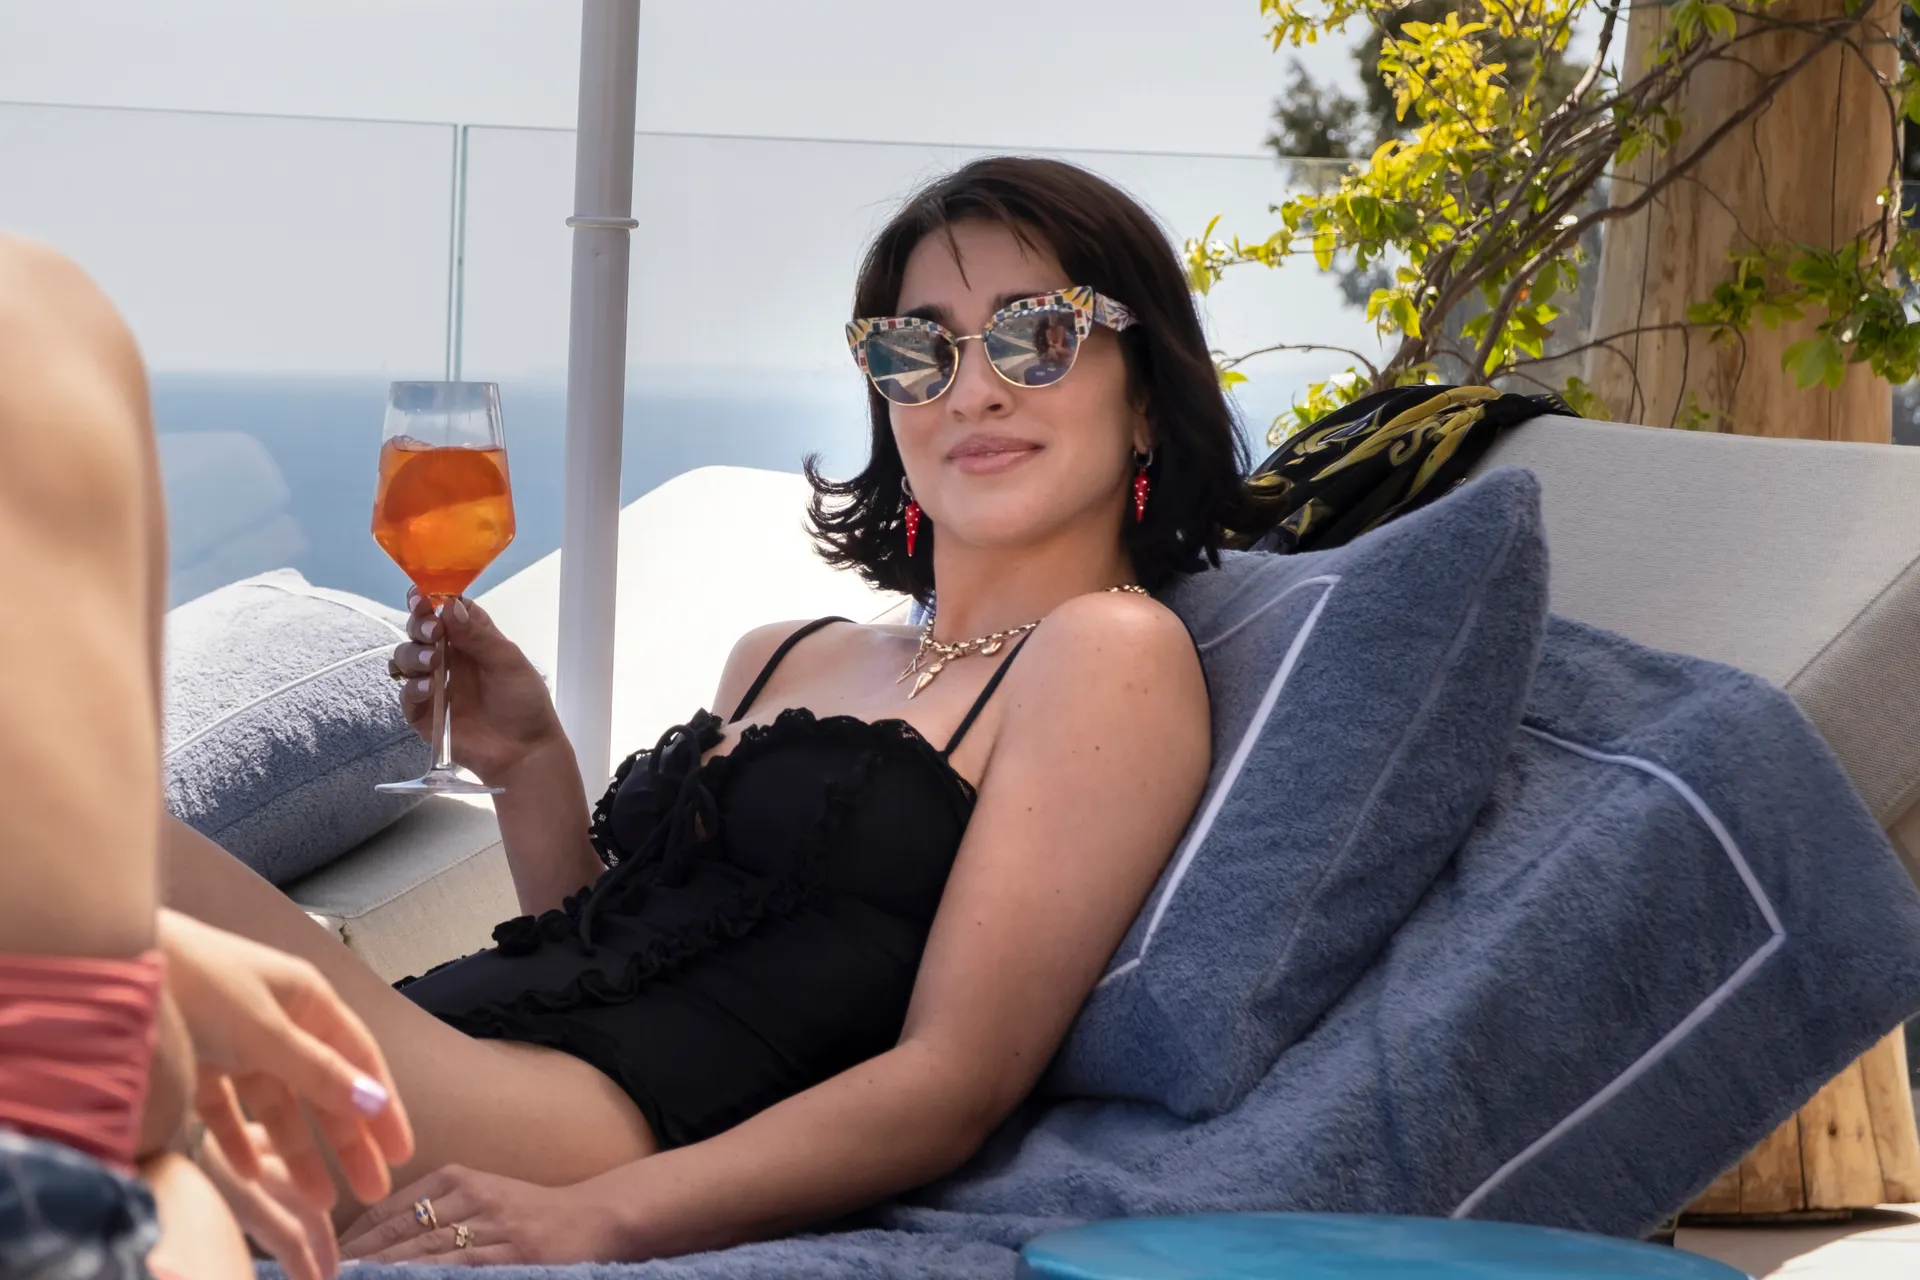 Lucia (Simona Tabasco) sipping a cocktail by the pool